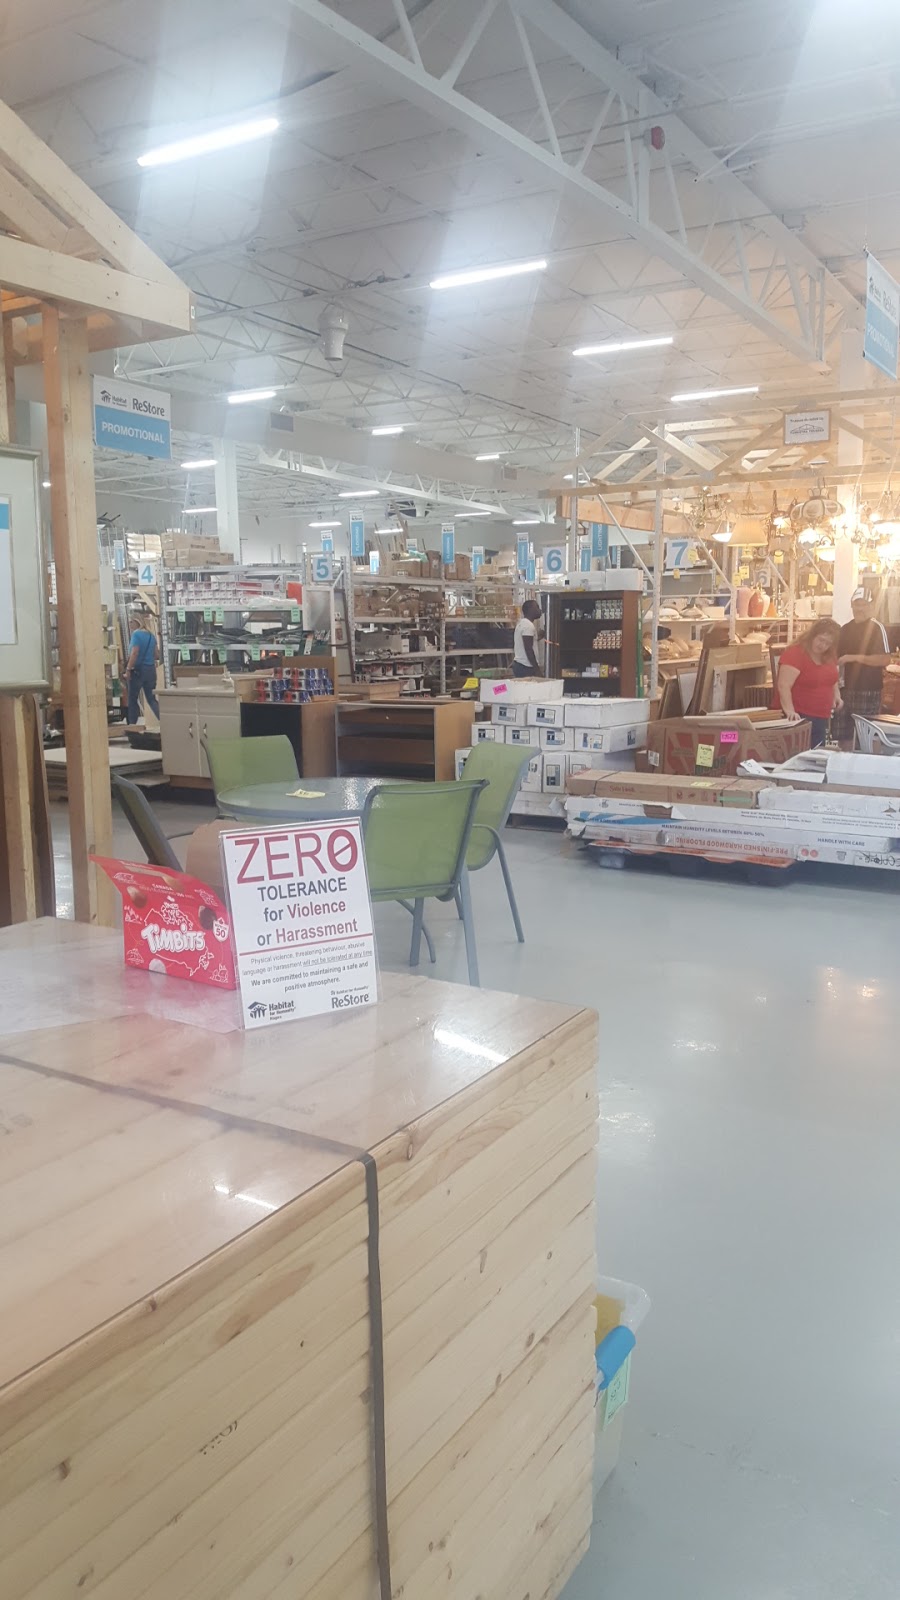 Grimsby ReStore (Habitat for Humanity Niagara) | 185 S Service Rd, Grimsby, ON L3M 4H6, Canada | Phone: (905) 309-7365